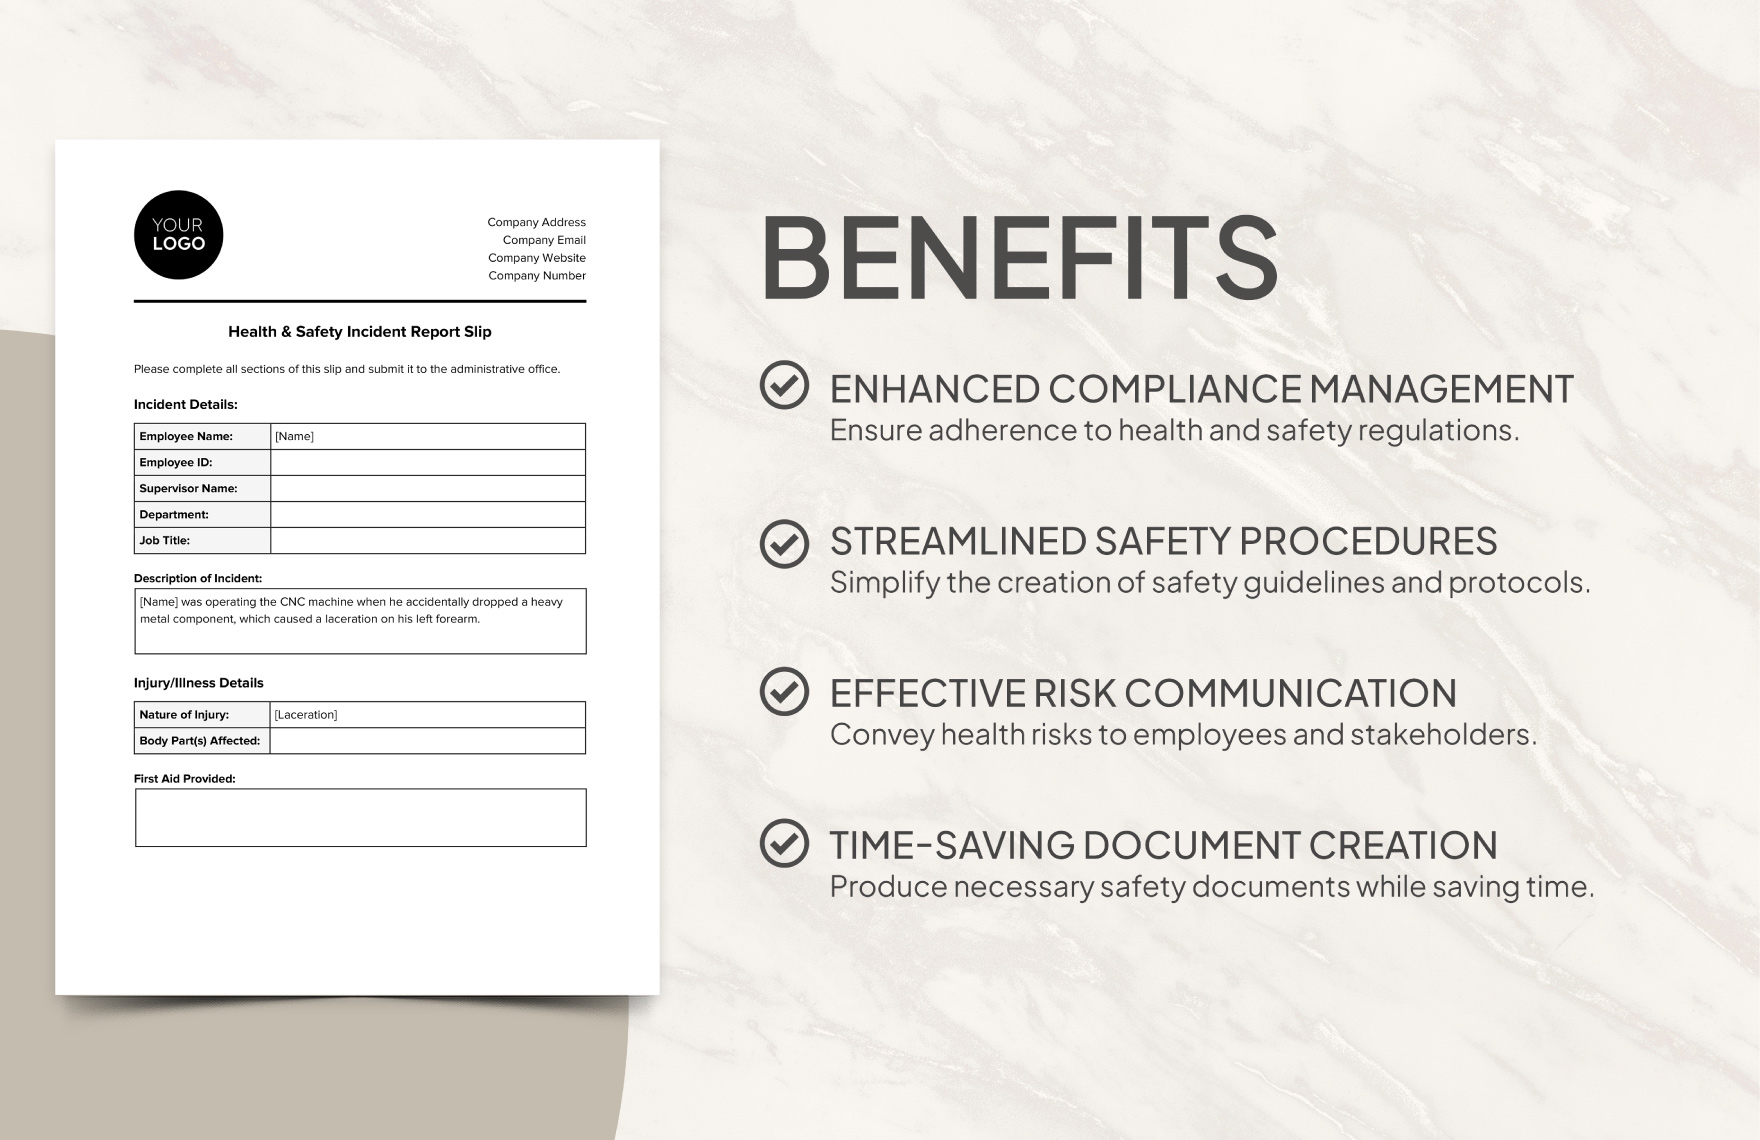 Health & Safety Incident Report Slip Template